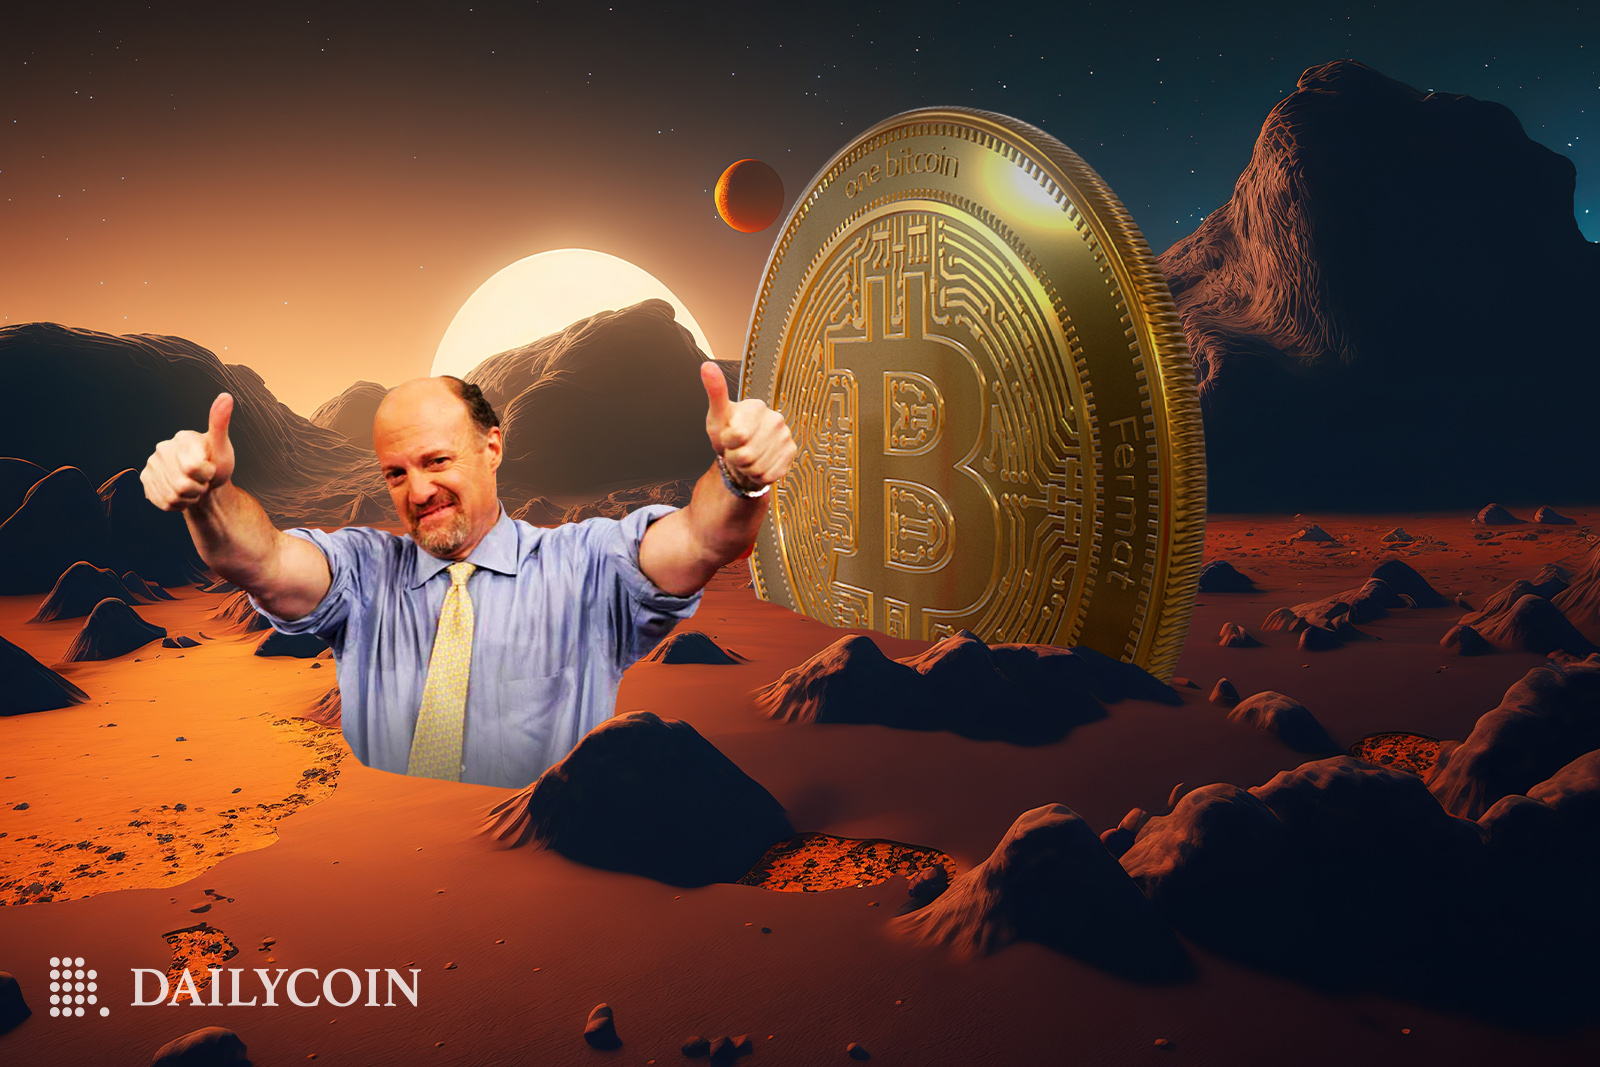 Smiling Jim Cramer emerges from the ground holding thumbs up as the golden Bitcoin dips into the orange sand.